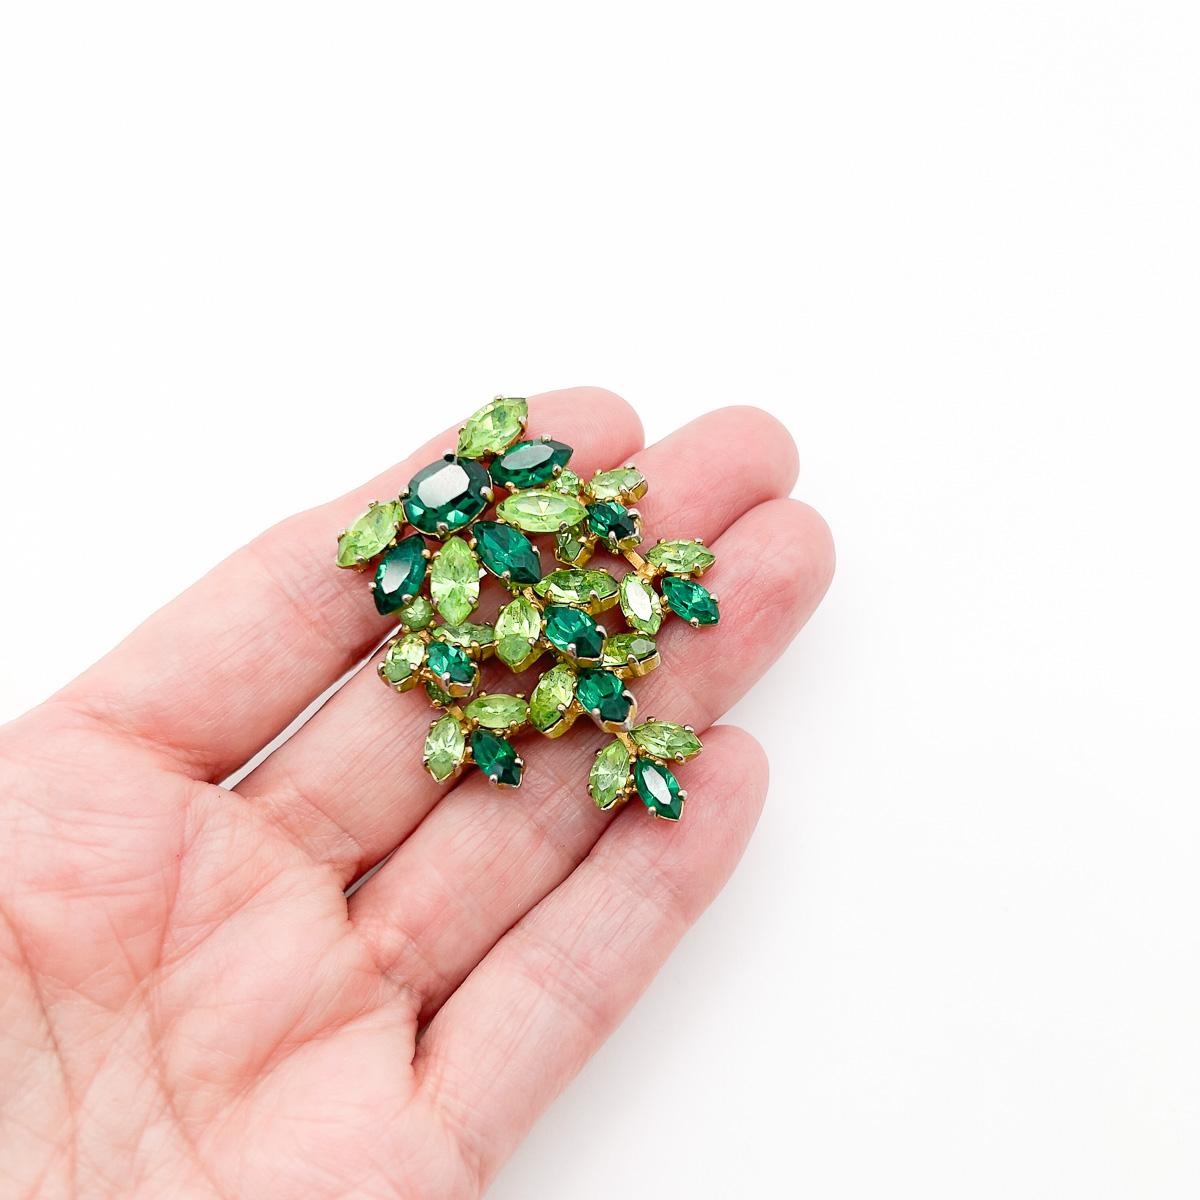 A Vintage Mitchel Maer Emerald Brooch. Tumbling shades of green catch the eye.
This adorable vintage Mitchel Maer brooch would have been made in London, England in the early 1950s. Mitchel Maer's work was sought-after, so much so between the years